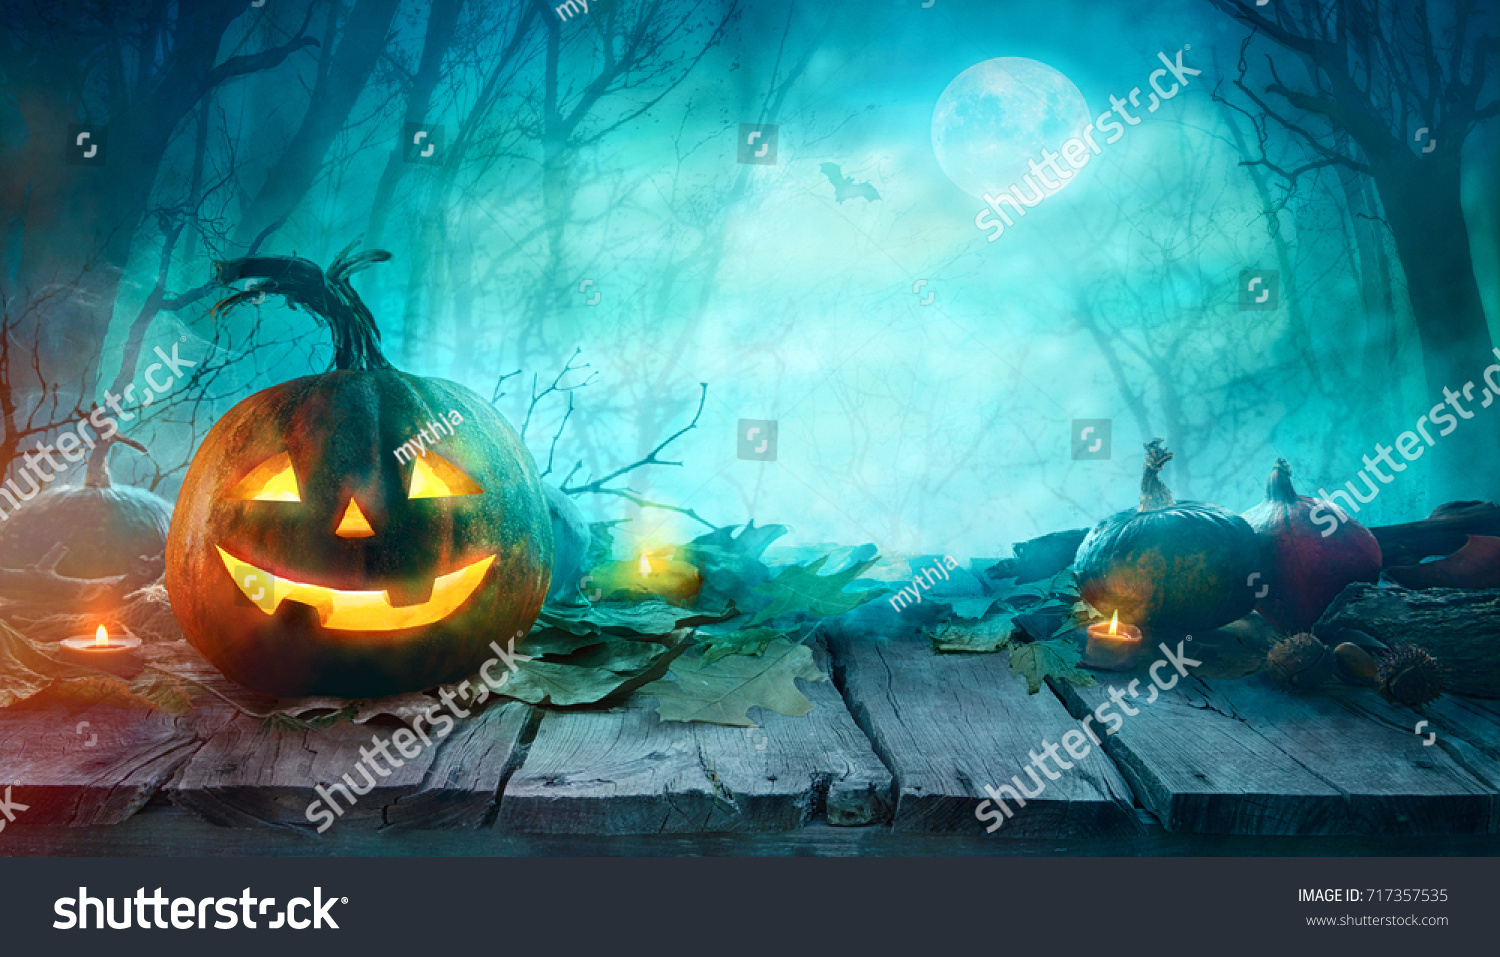 Halloween Pumpkins on wood. Halloween Background At Night Forest with Moon.
 #717357535